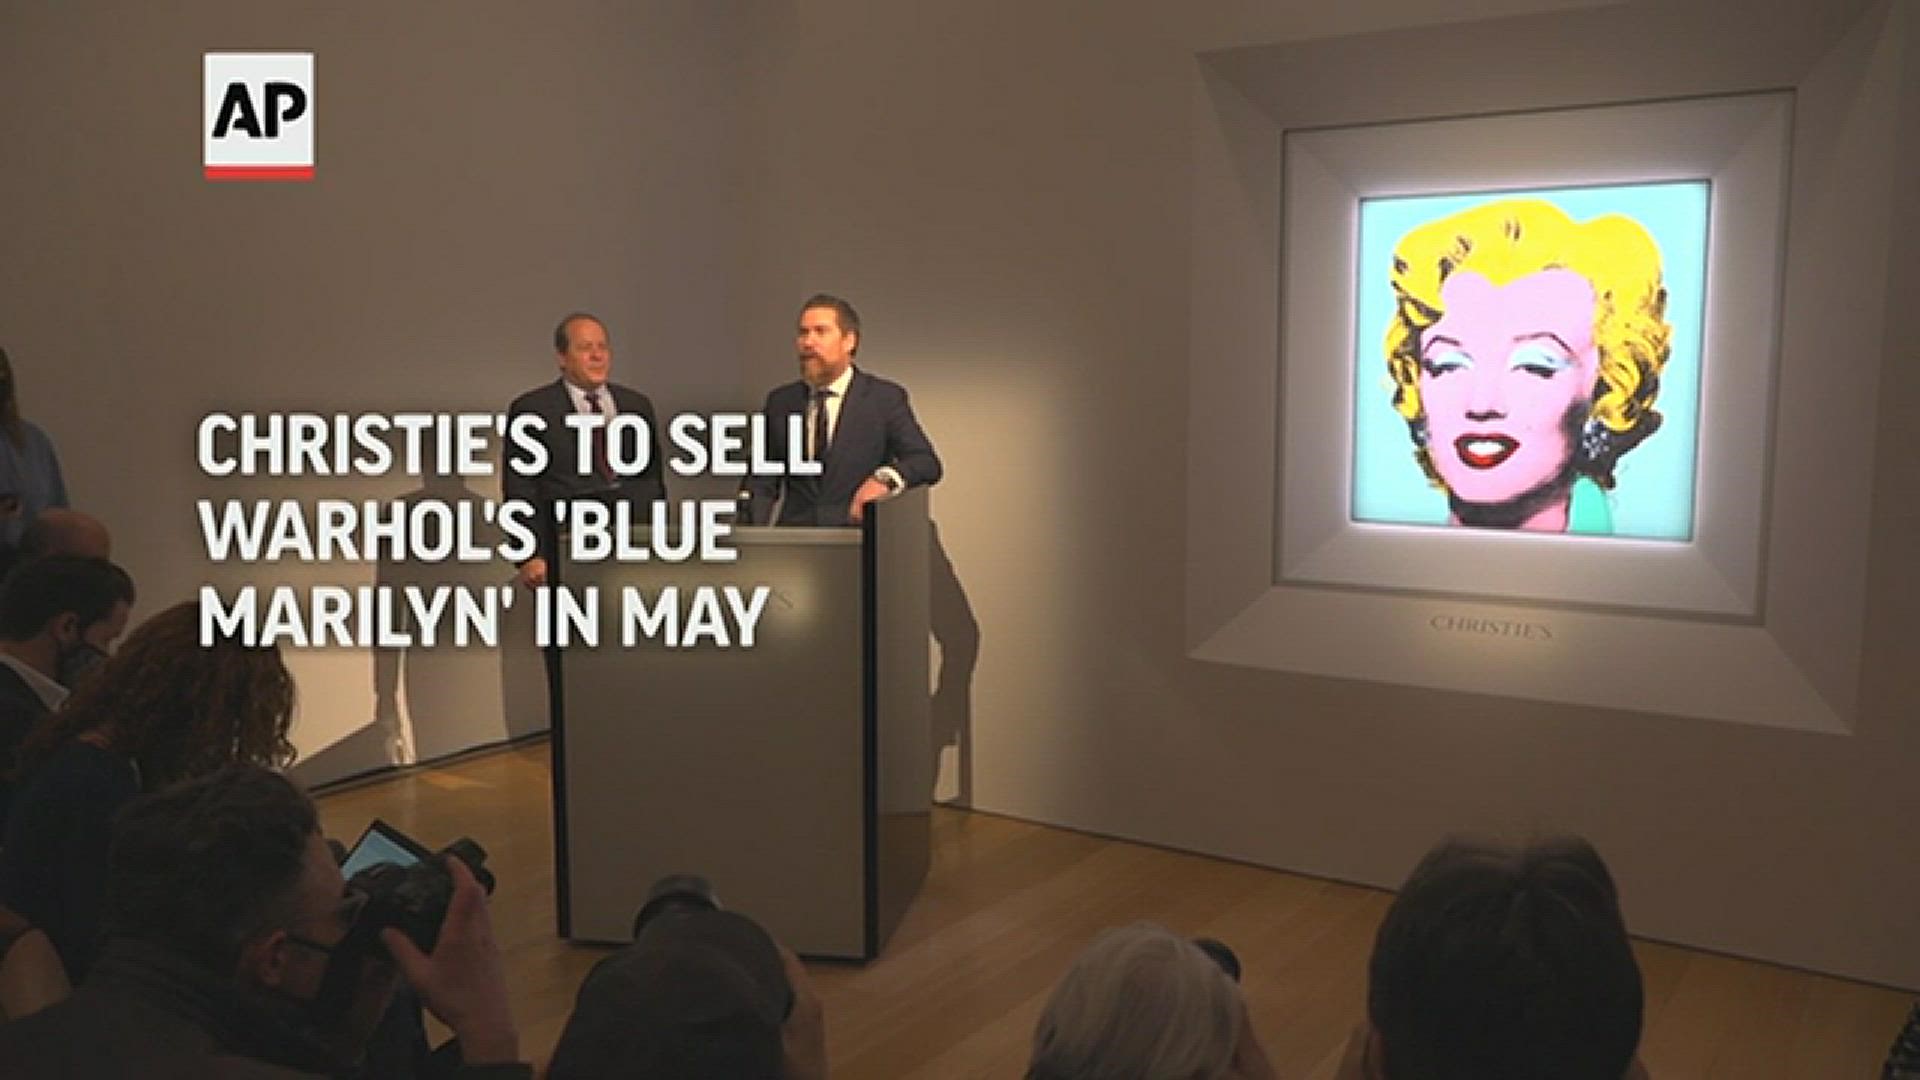 Andy Warhol's "Shot Sage Blue Marilyn" image is being auctioned in May for what is expected to be record-breaking price.